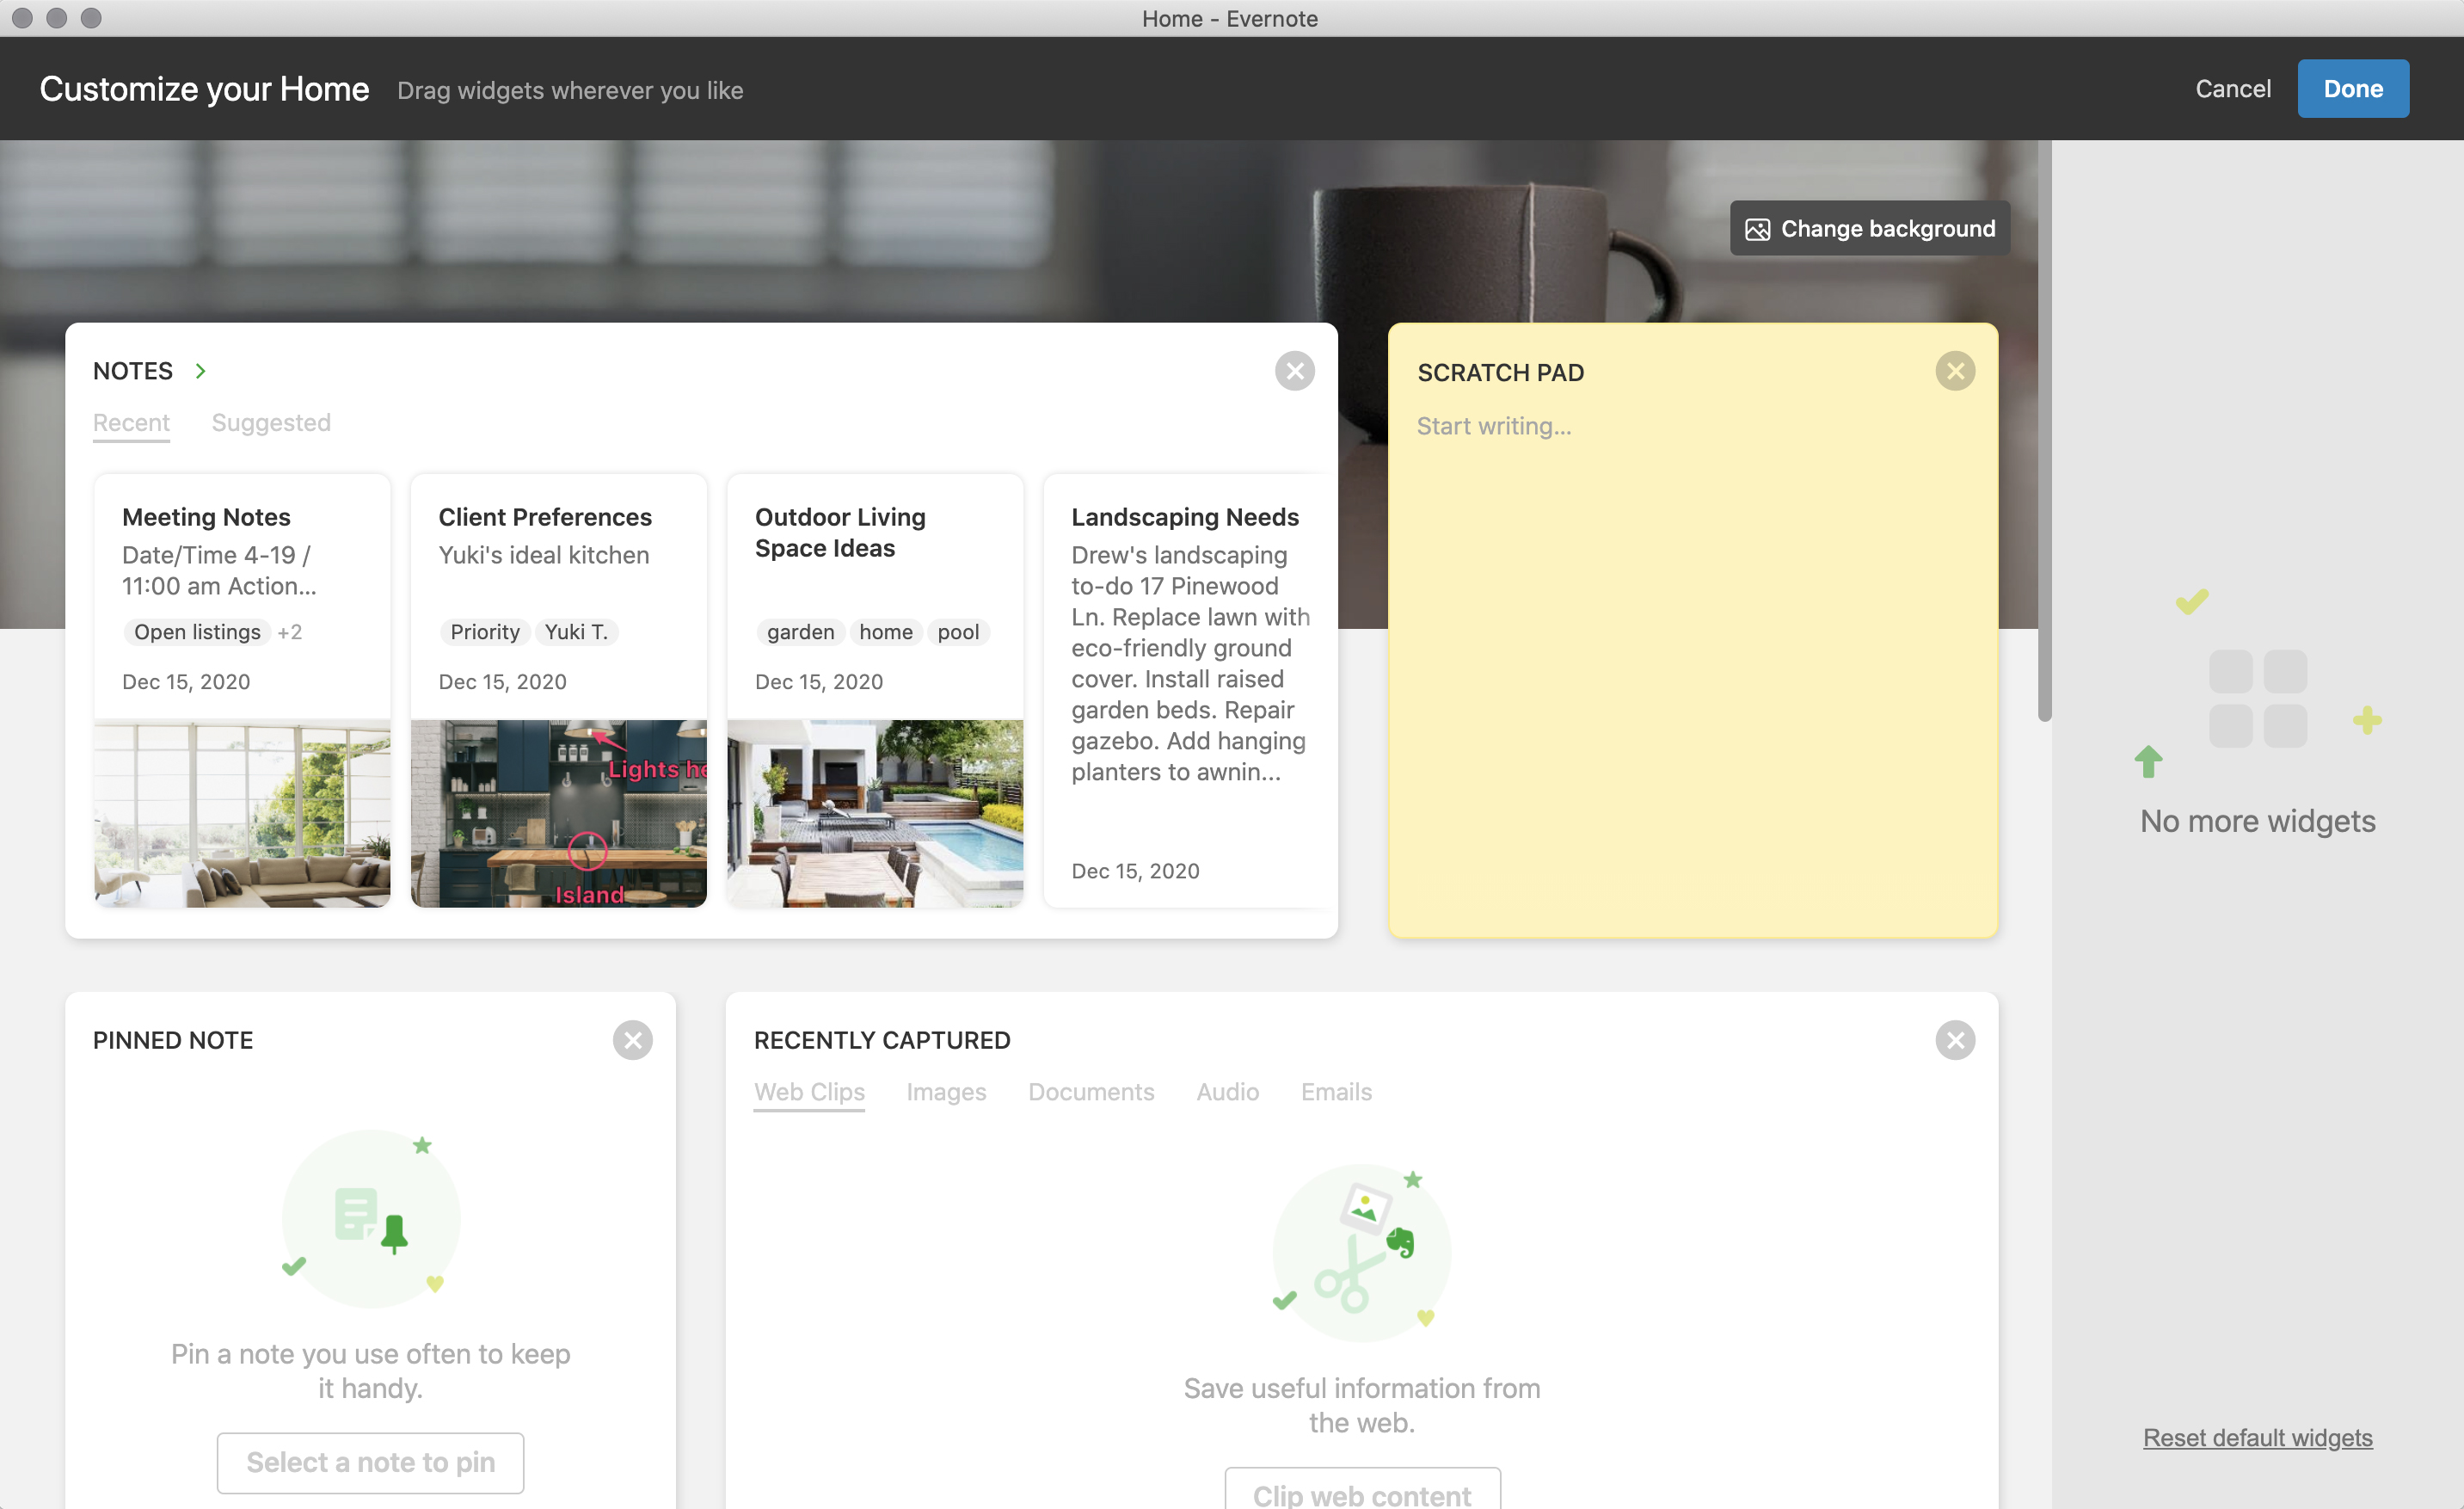 Customize Home in Evernote